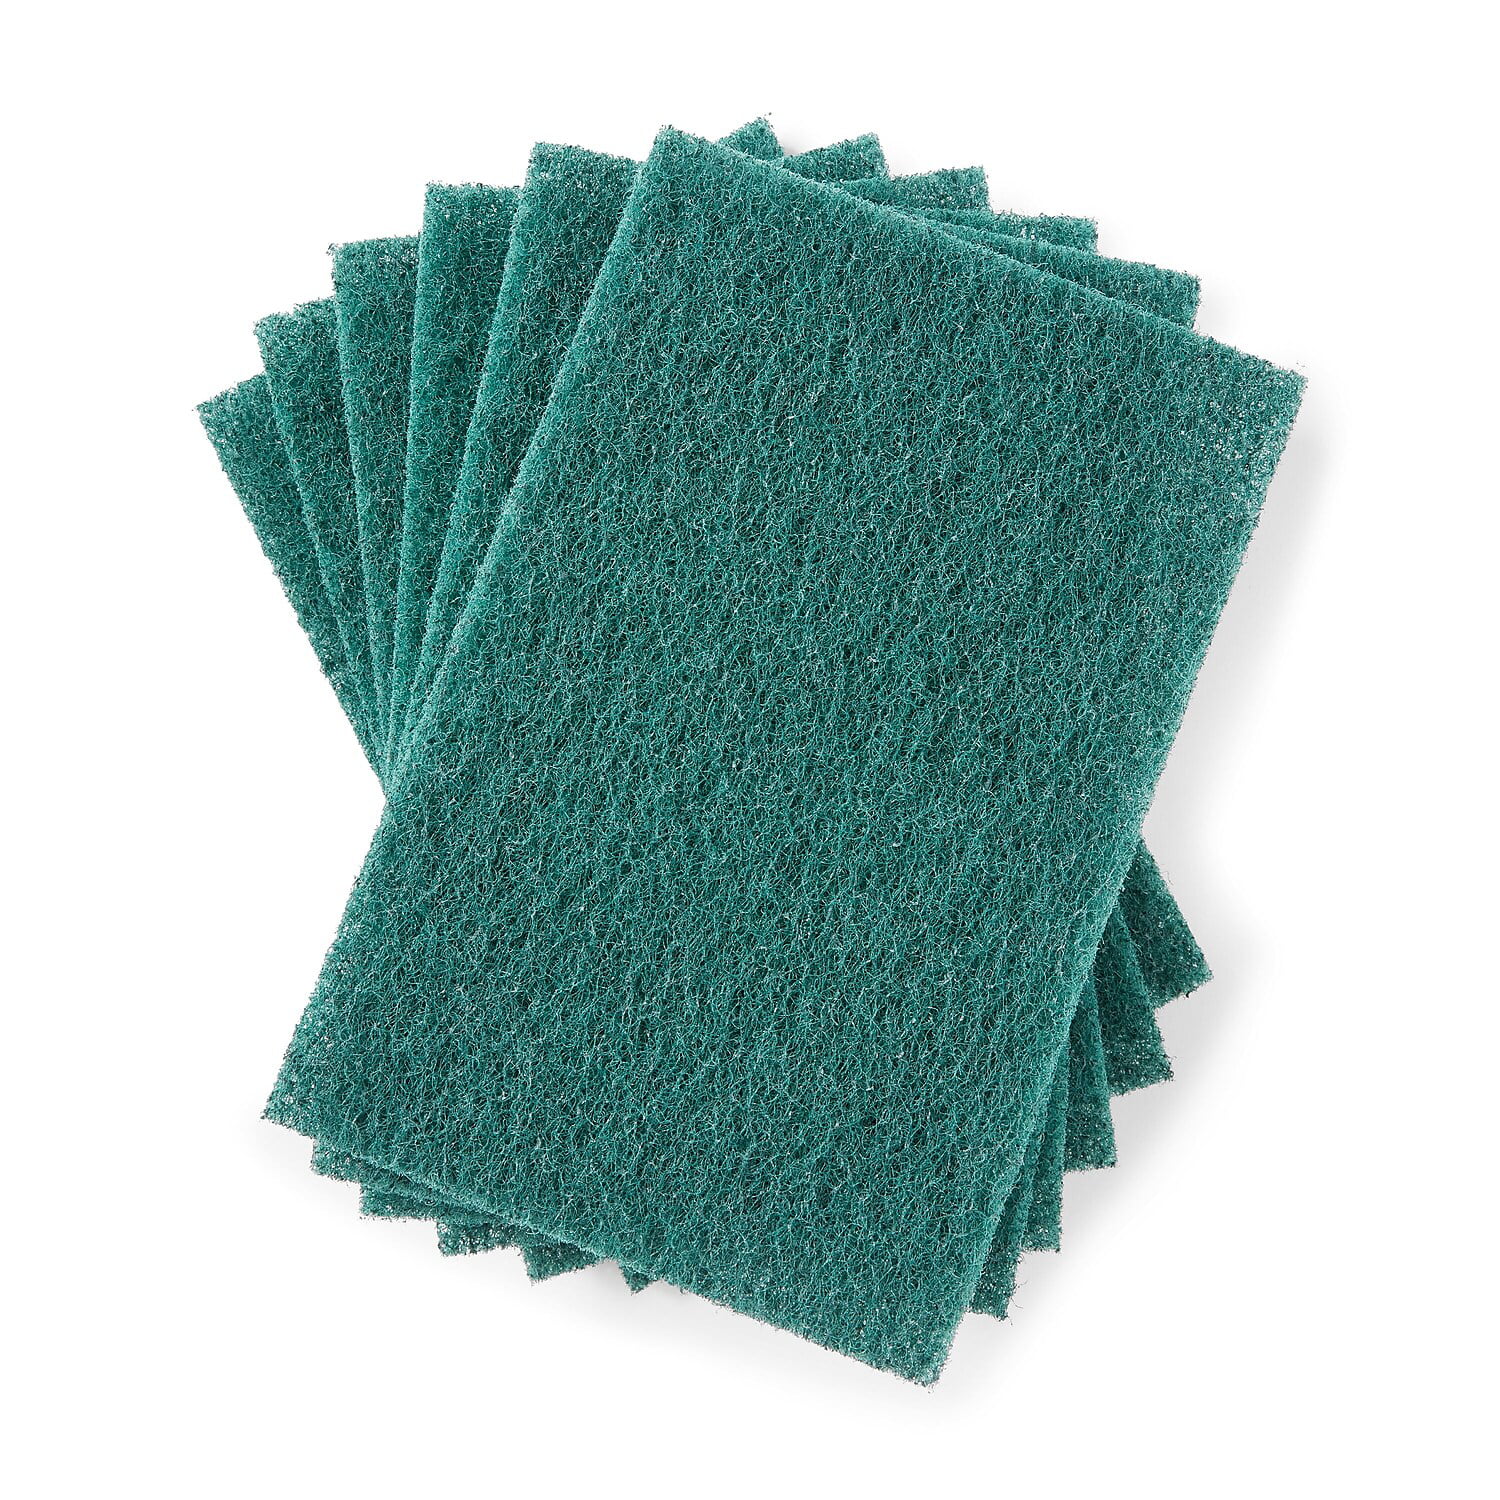 MR.SIGA Heavy Duty Scouring Pads, Household Scrubber for Kitchen, Sink,  Dish, 24-Pack, 3.9 x 5.9 inch 10 x 15 cm, Green